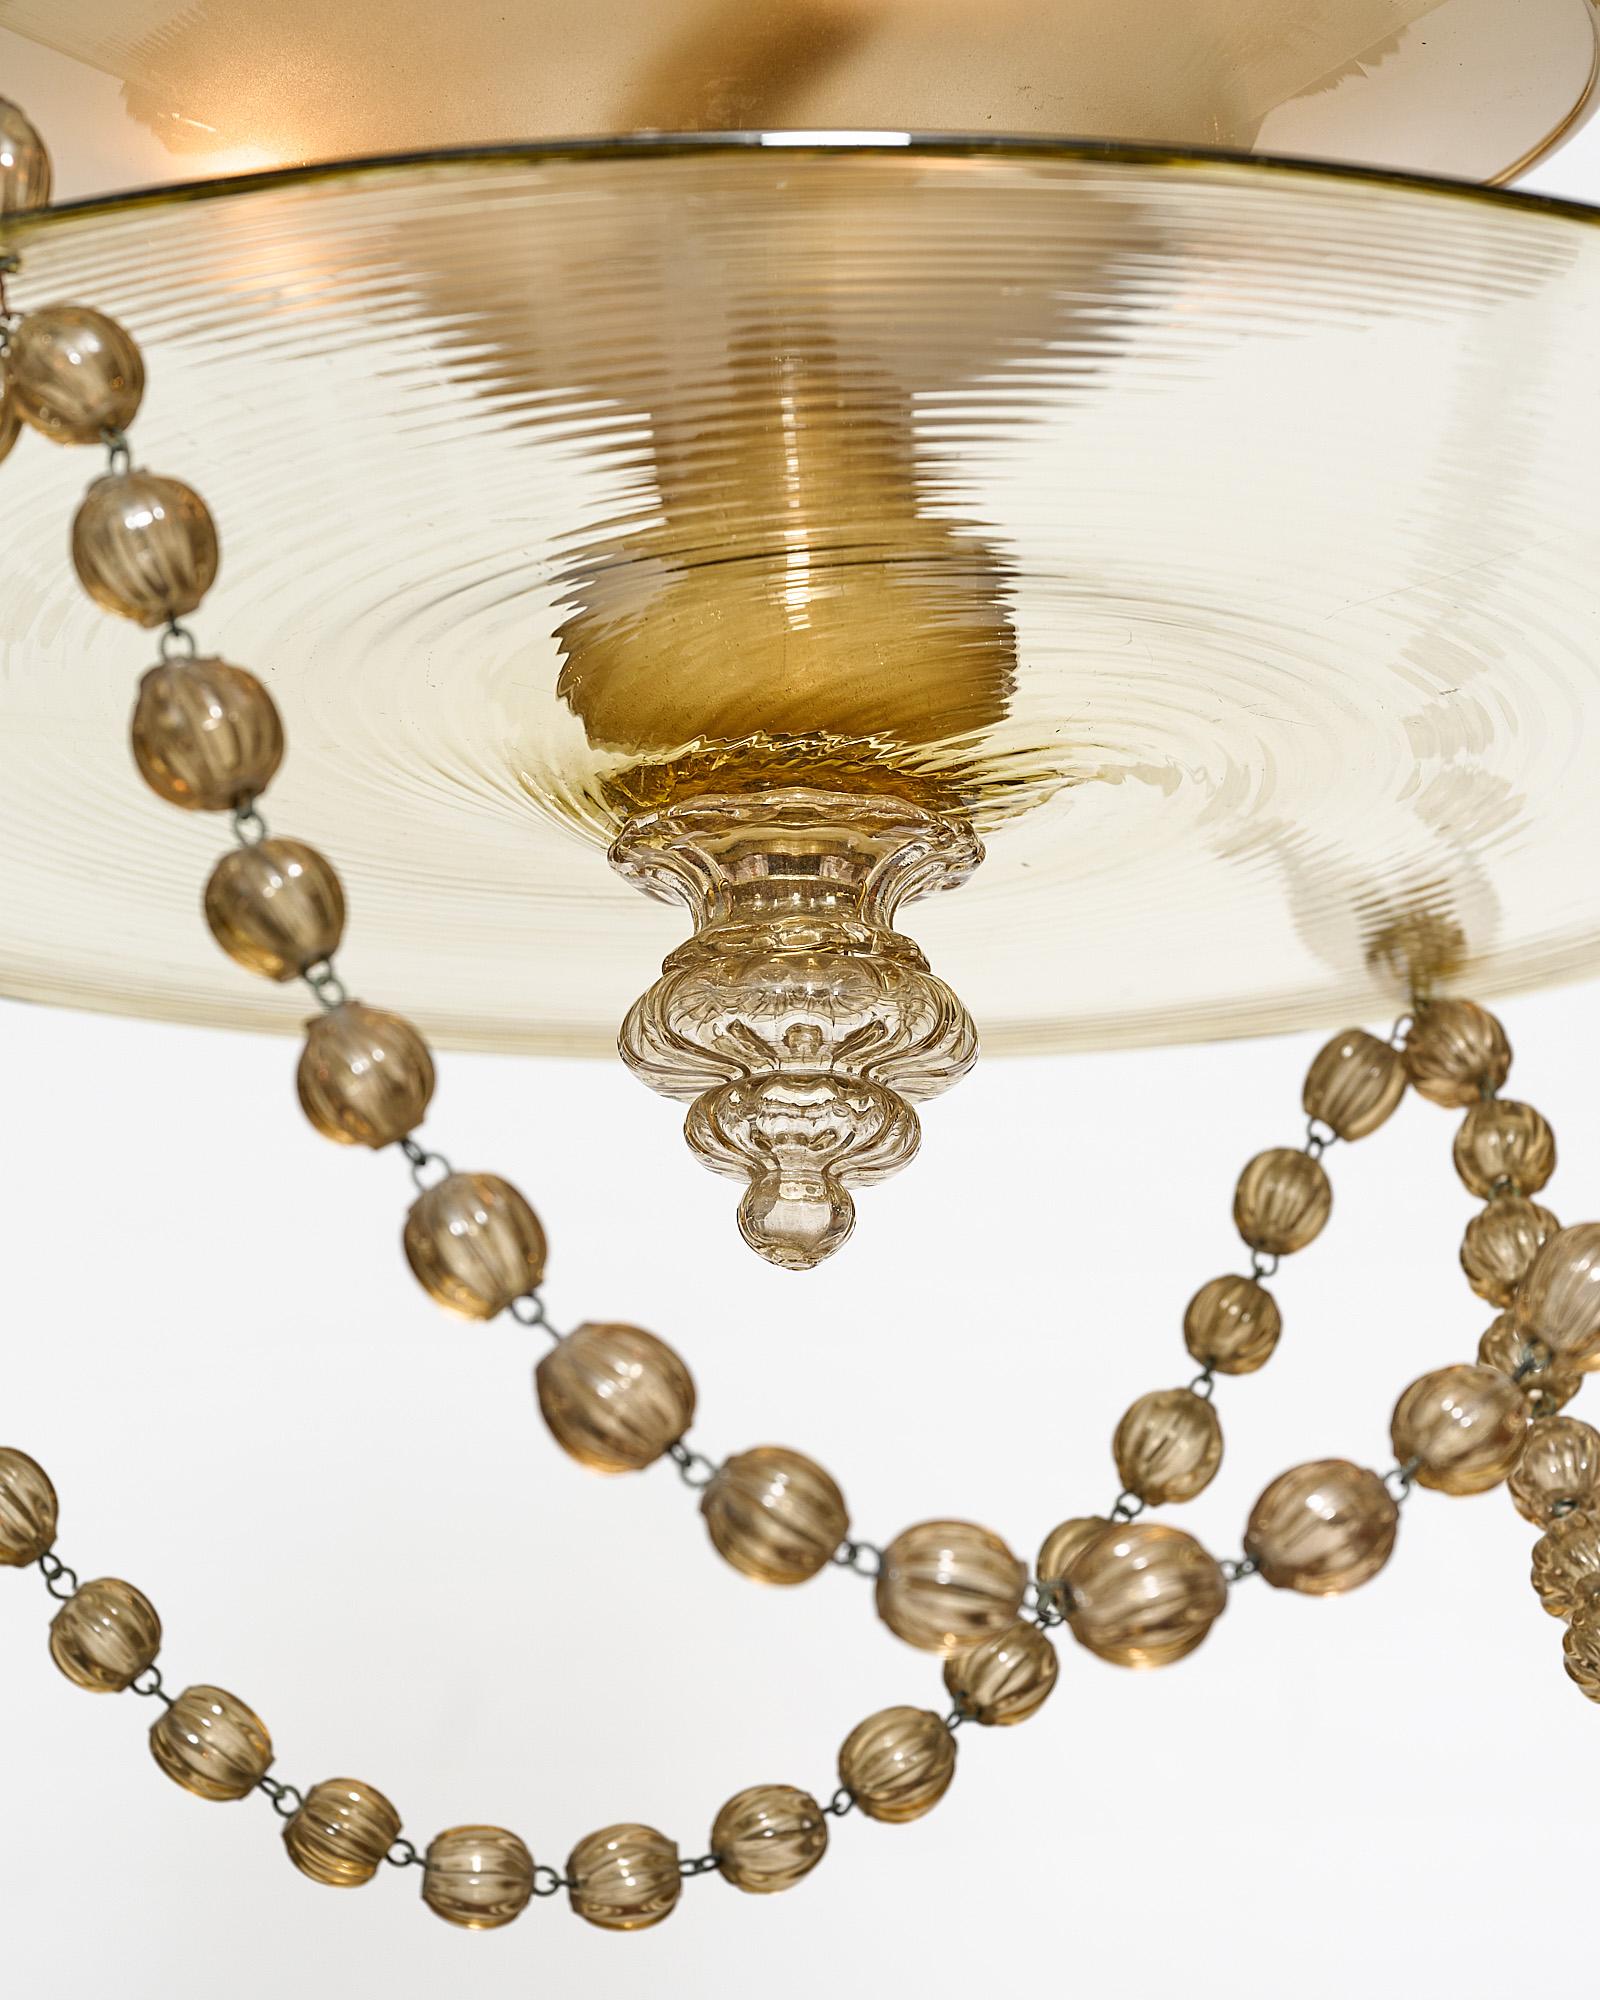 Mid-20th Century Murano Glass Vintage Chandelier For Sale